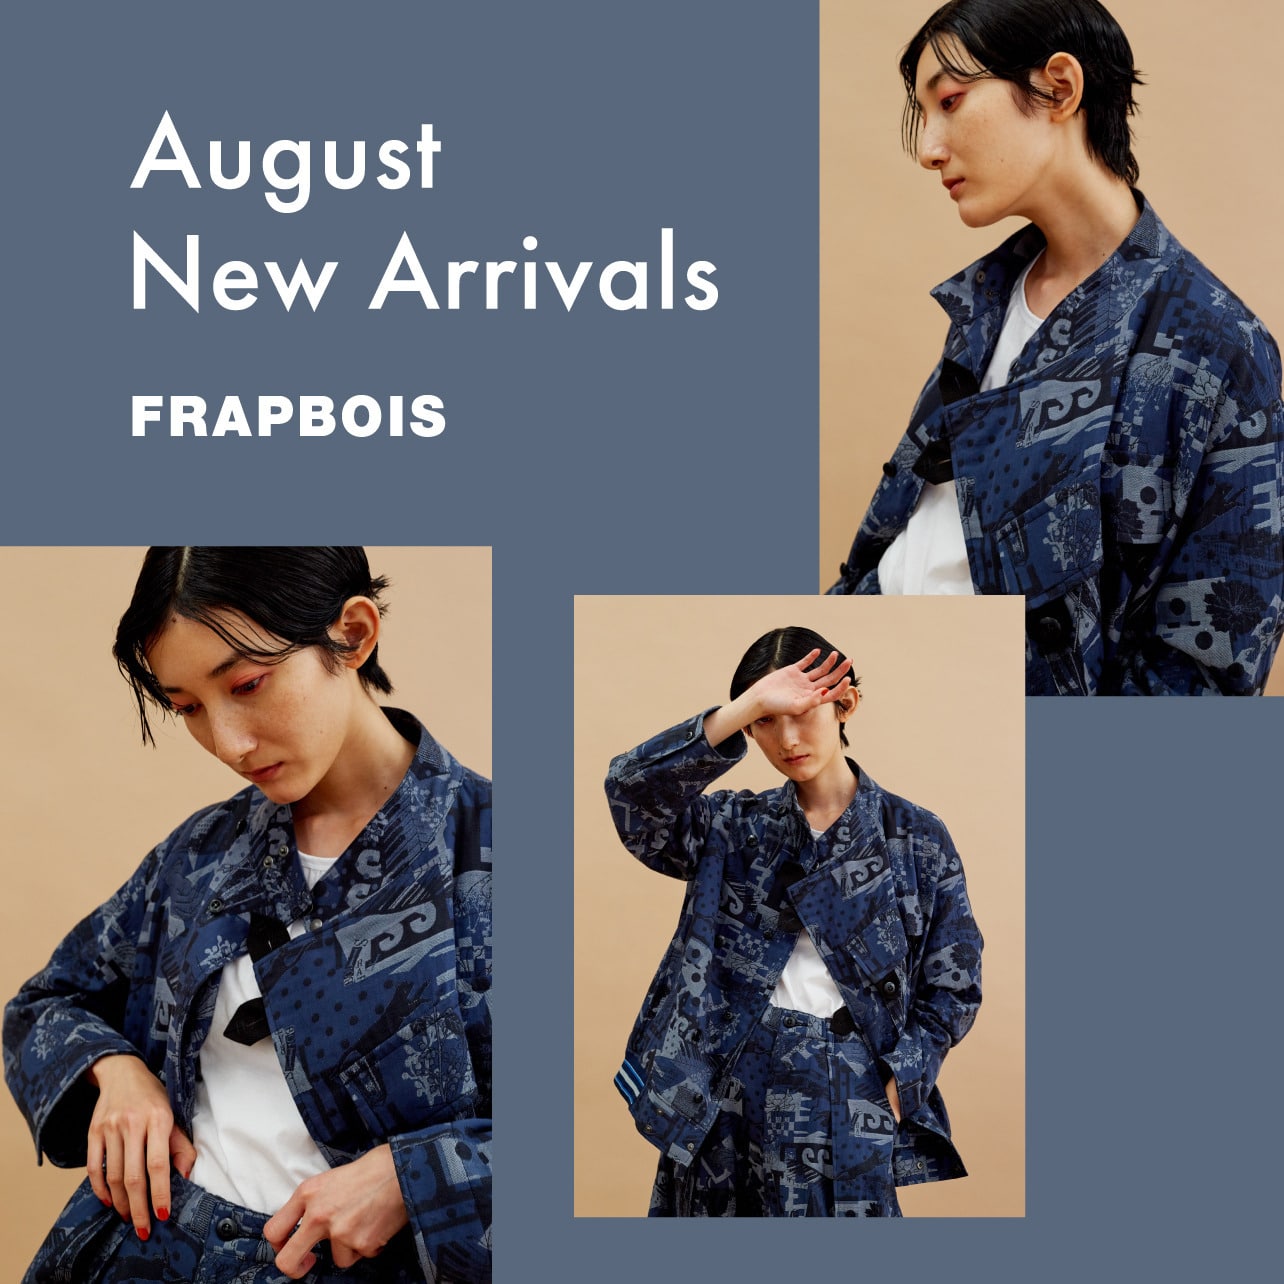 August New Arrivals